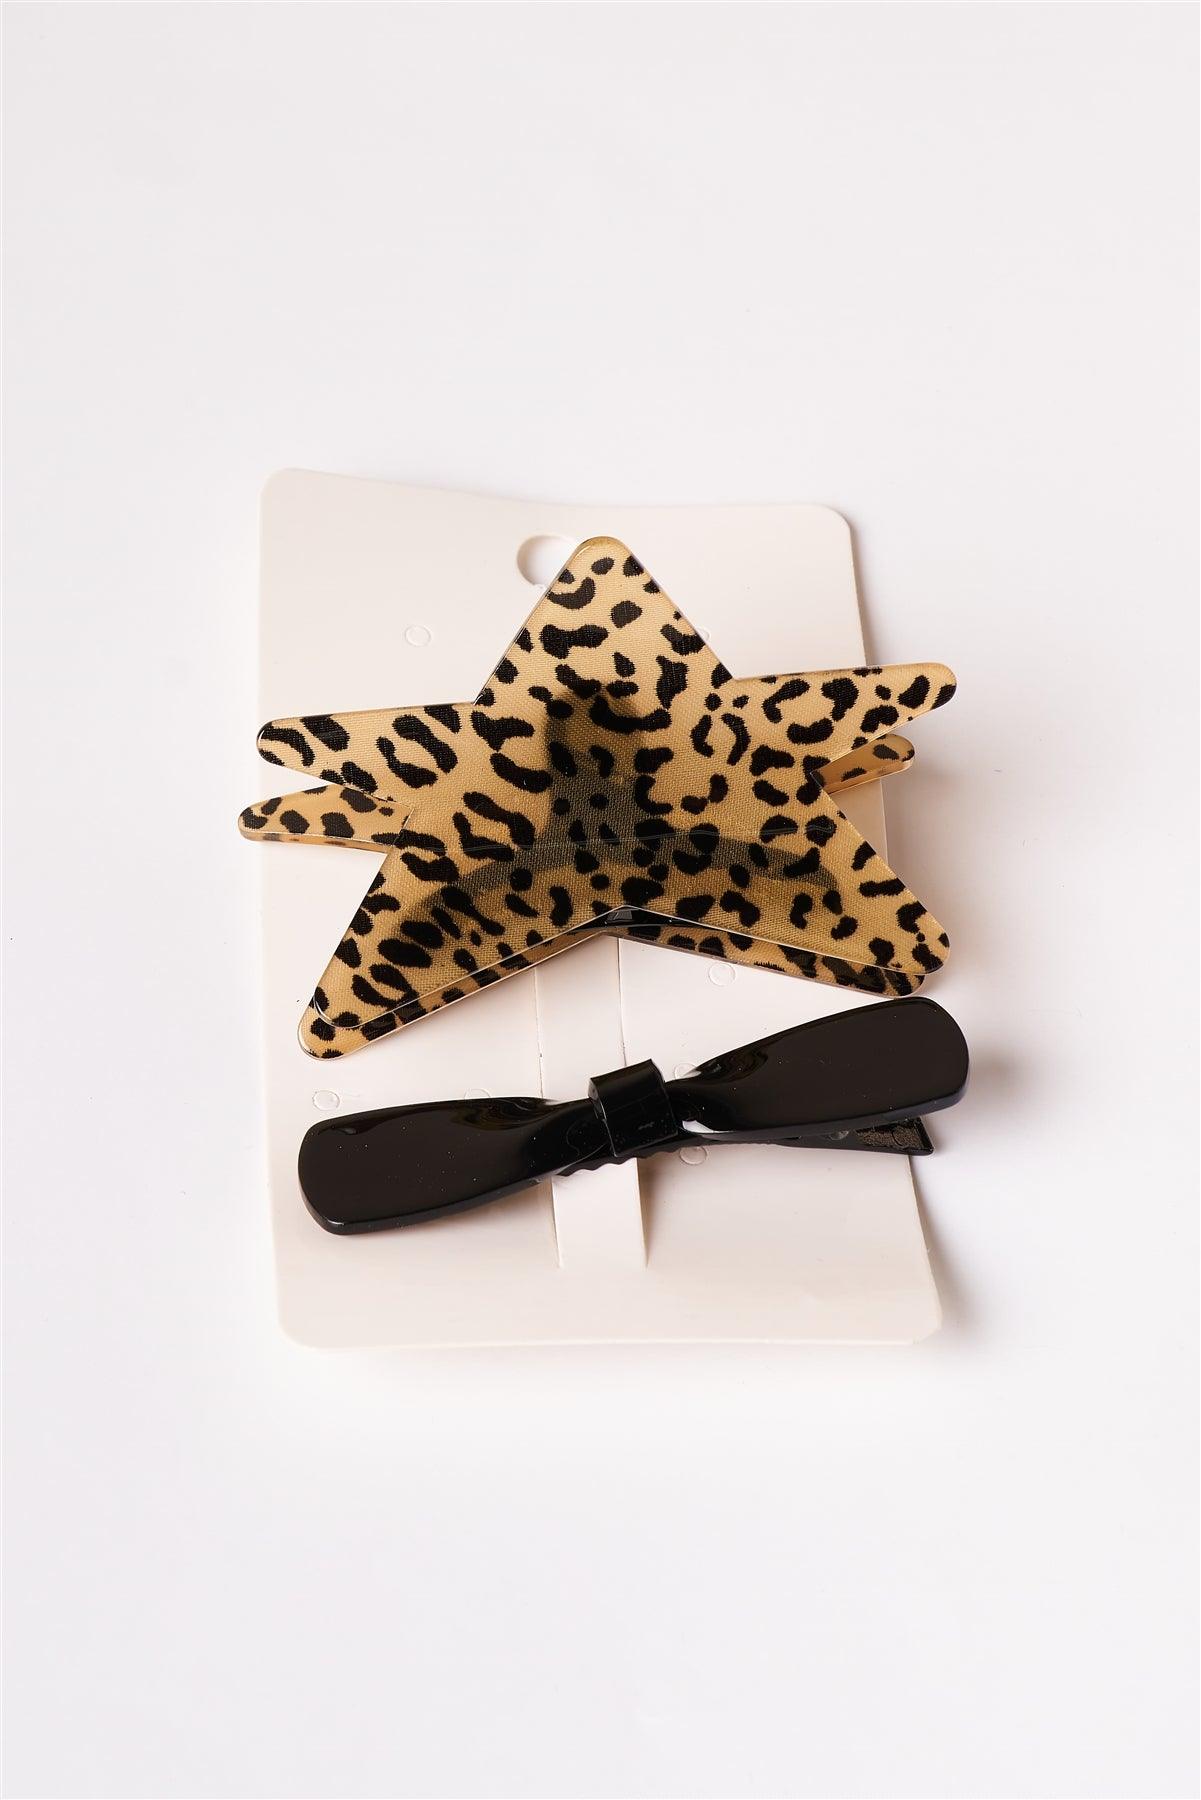 Cheetah Print Star Shaped Butterfly Clip With Black Bow Barrette /12 Pack